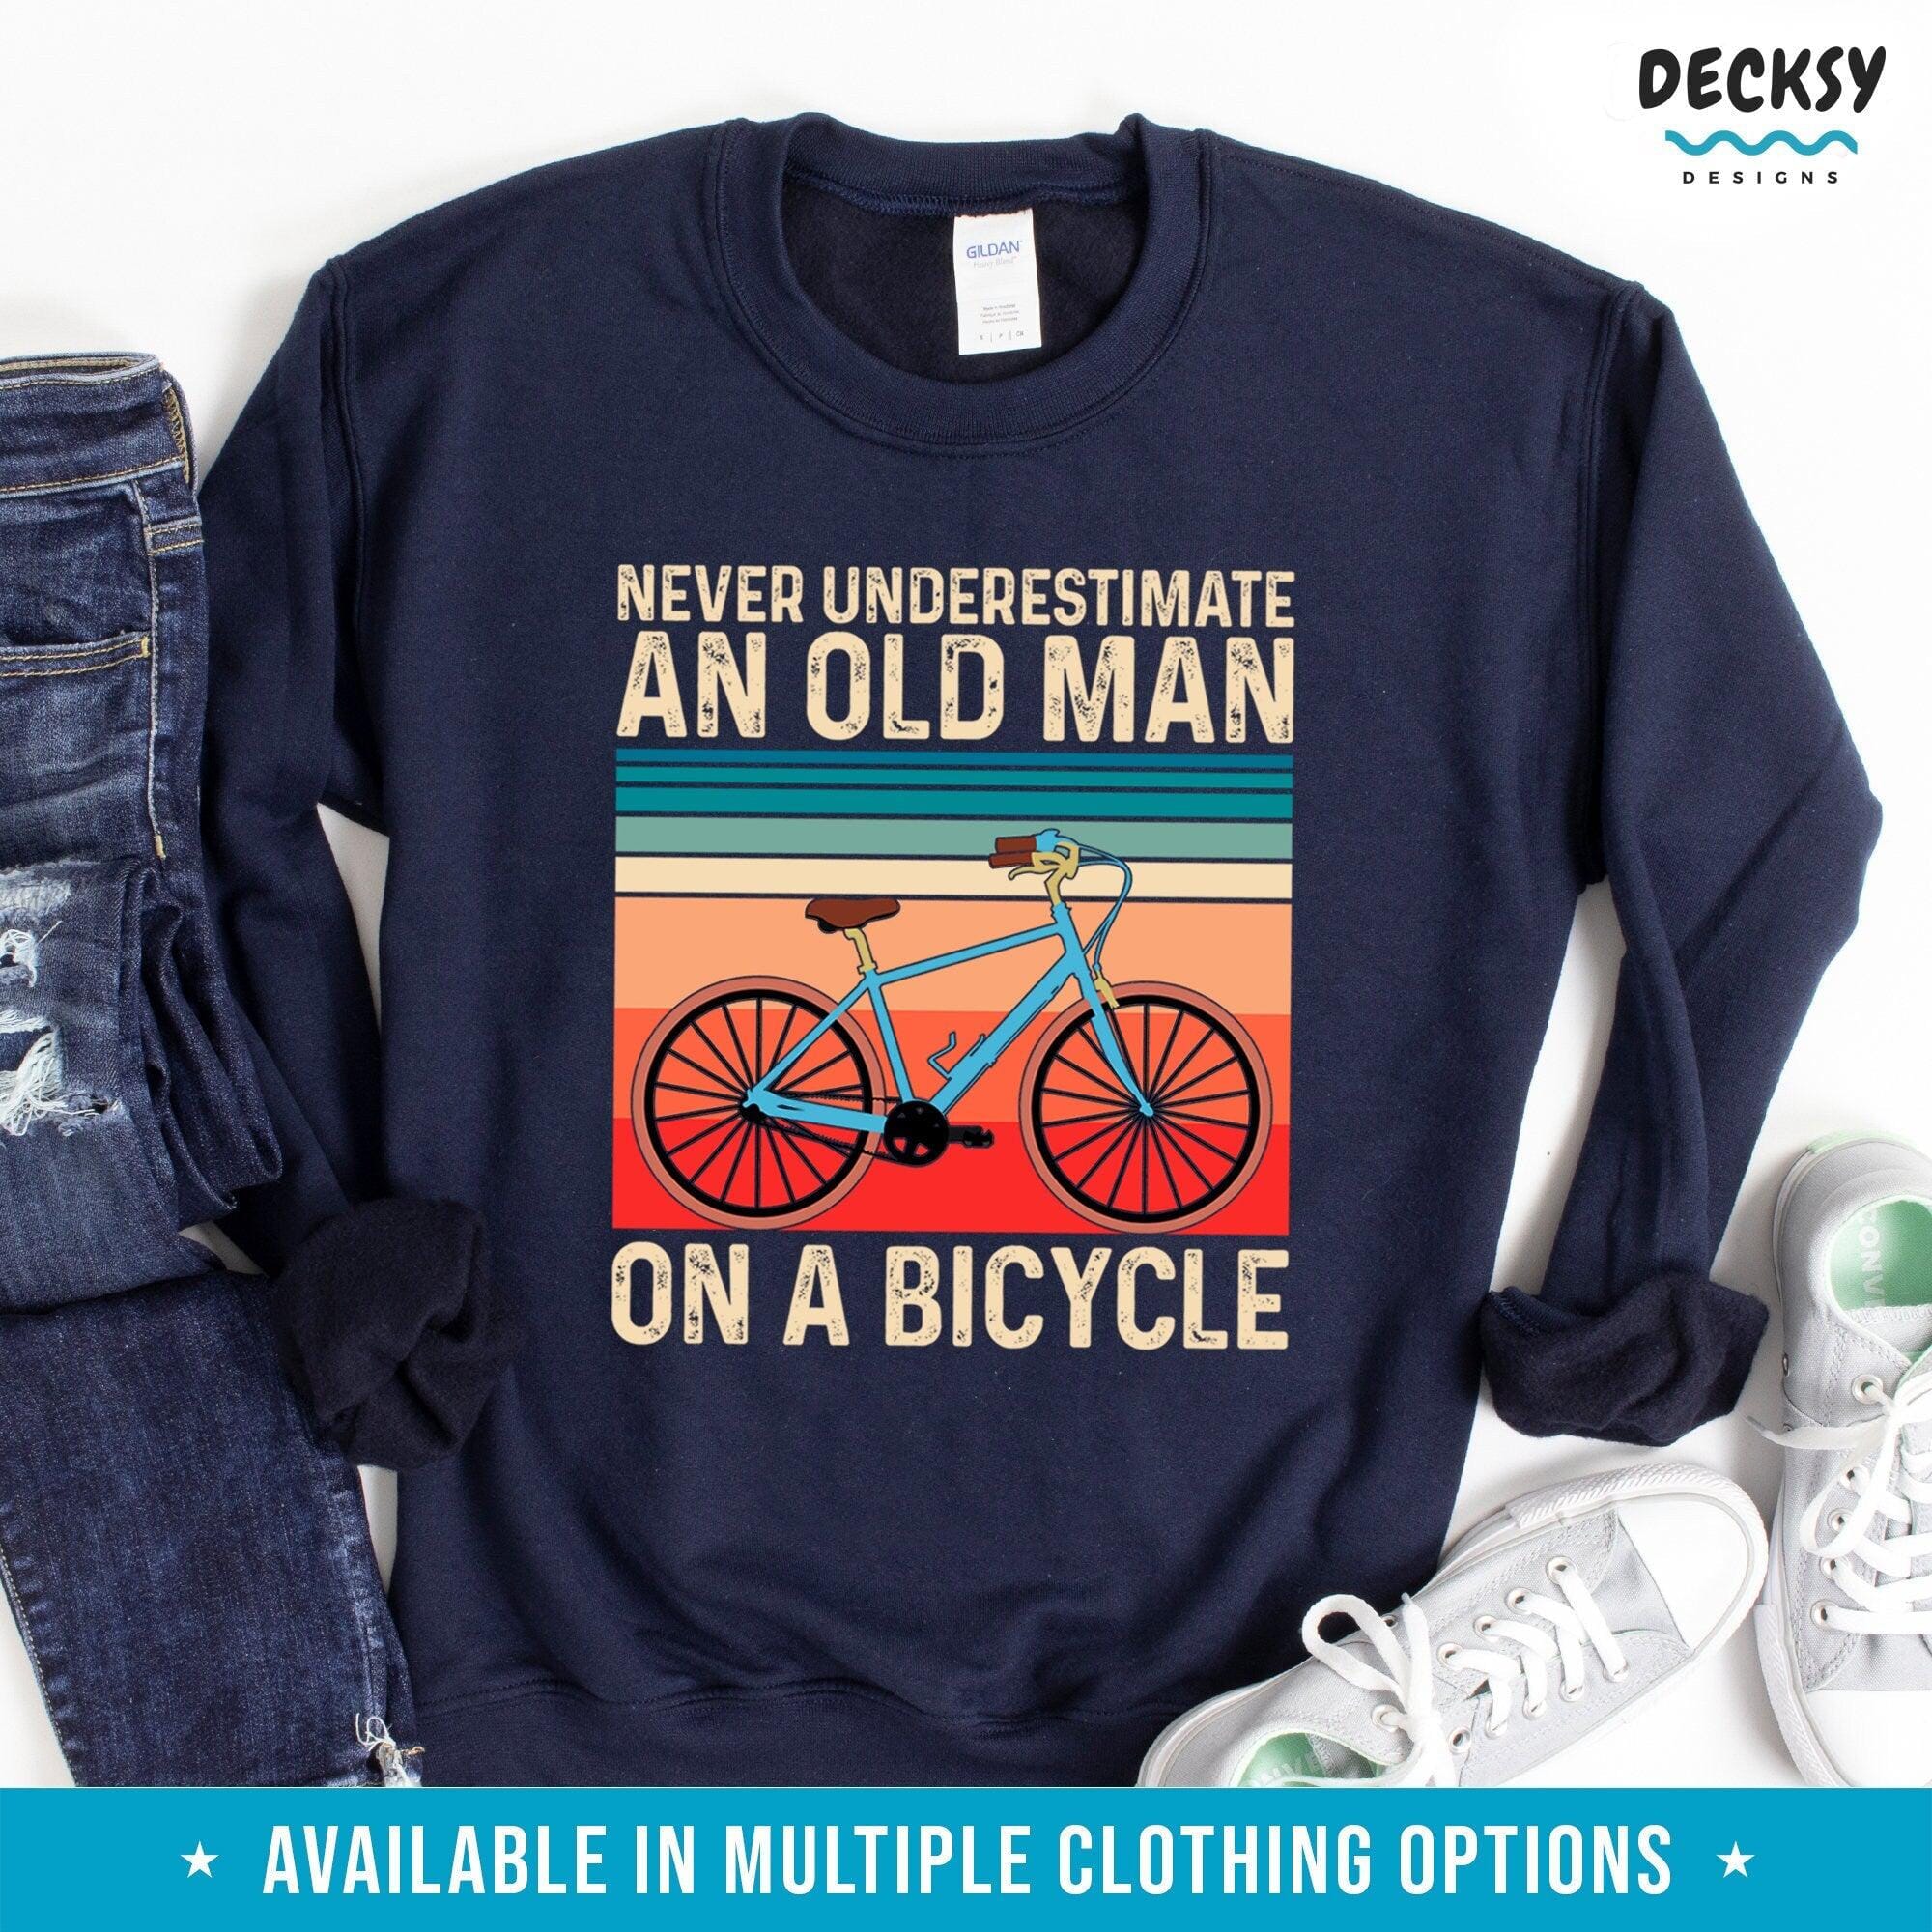 Cyclist Shirt, Cycling Dad Gift-Clothing:Gender-Neutral Adult Clothing:Tops & Tees:T-shirts:Graphic Tees-DecksyDesigns